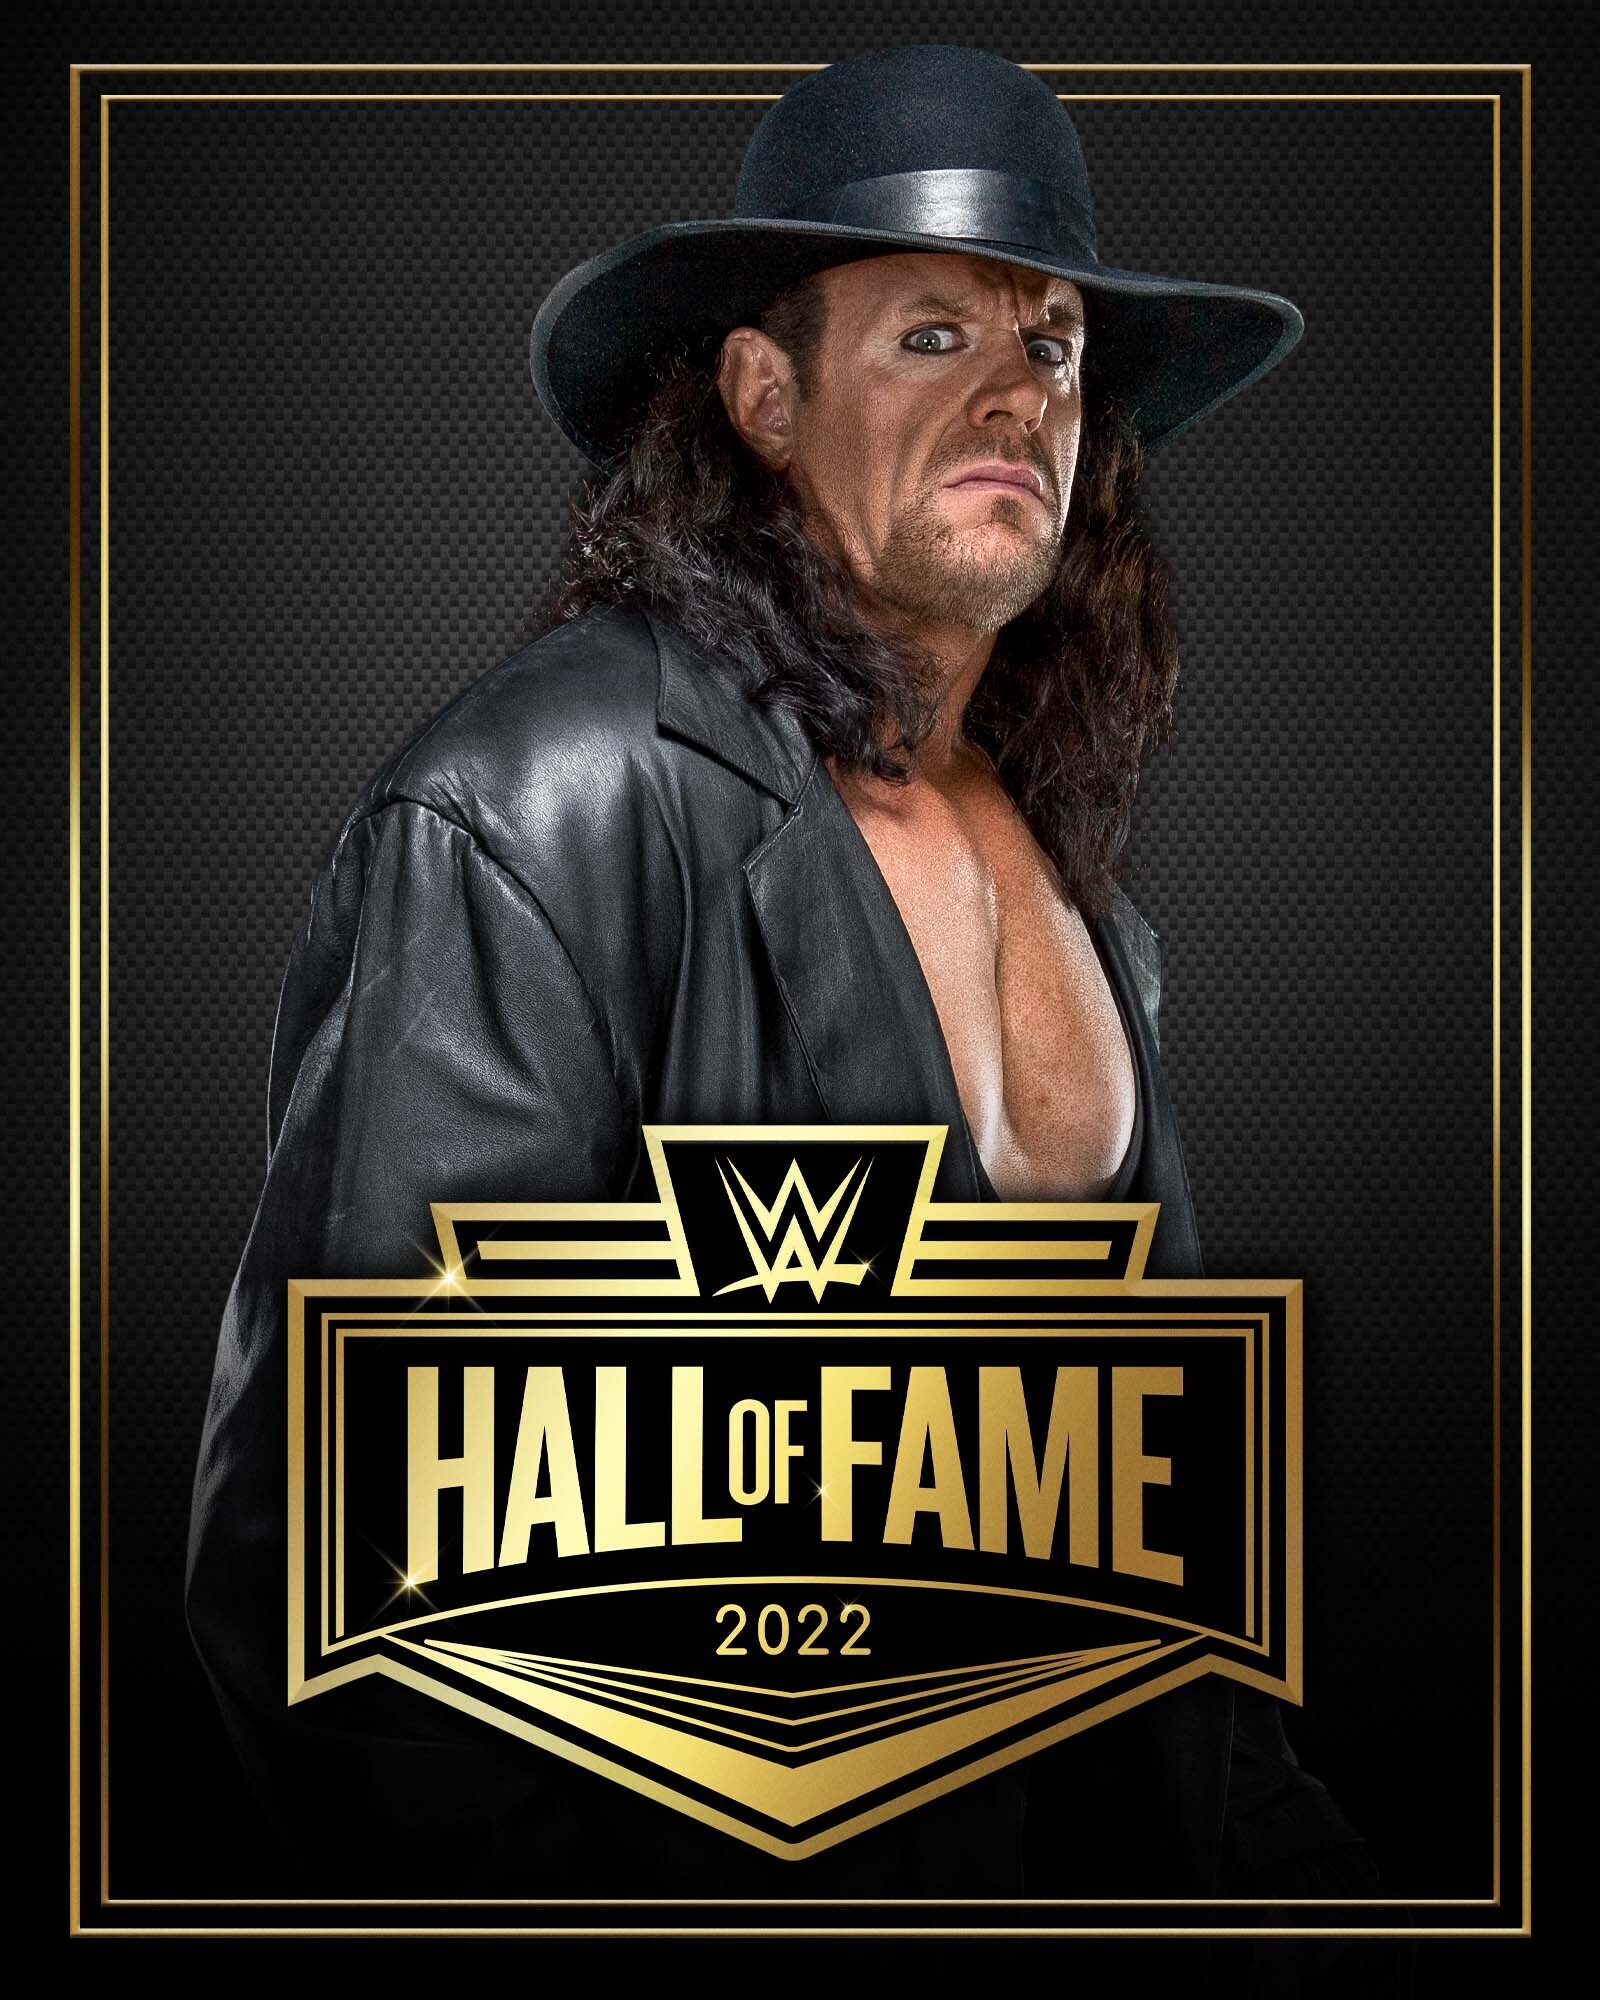 The Undertaker appointed to the WWE Hall of Fame 2022